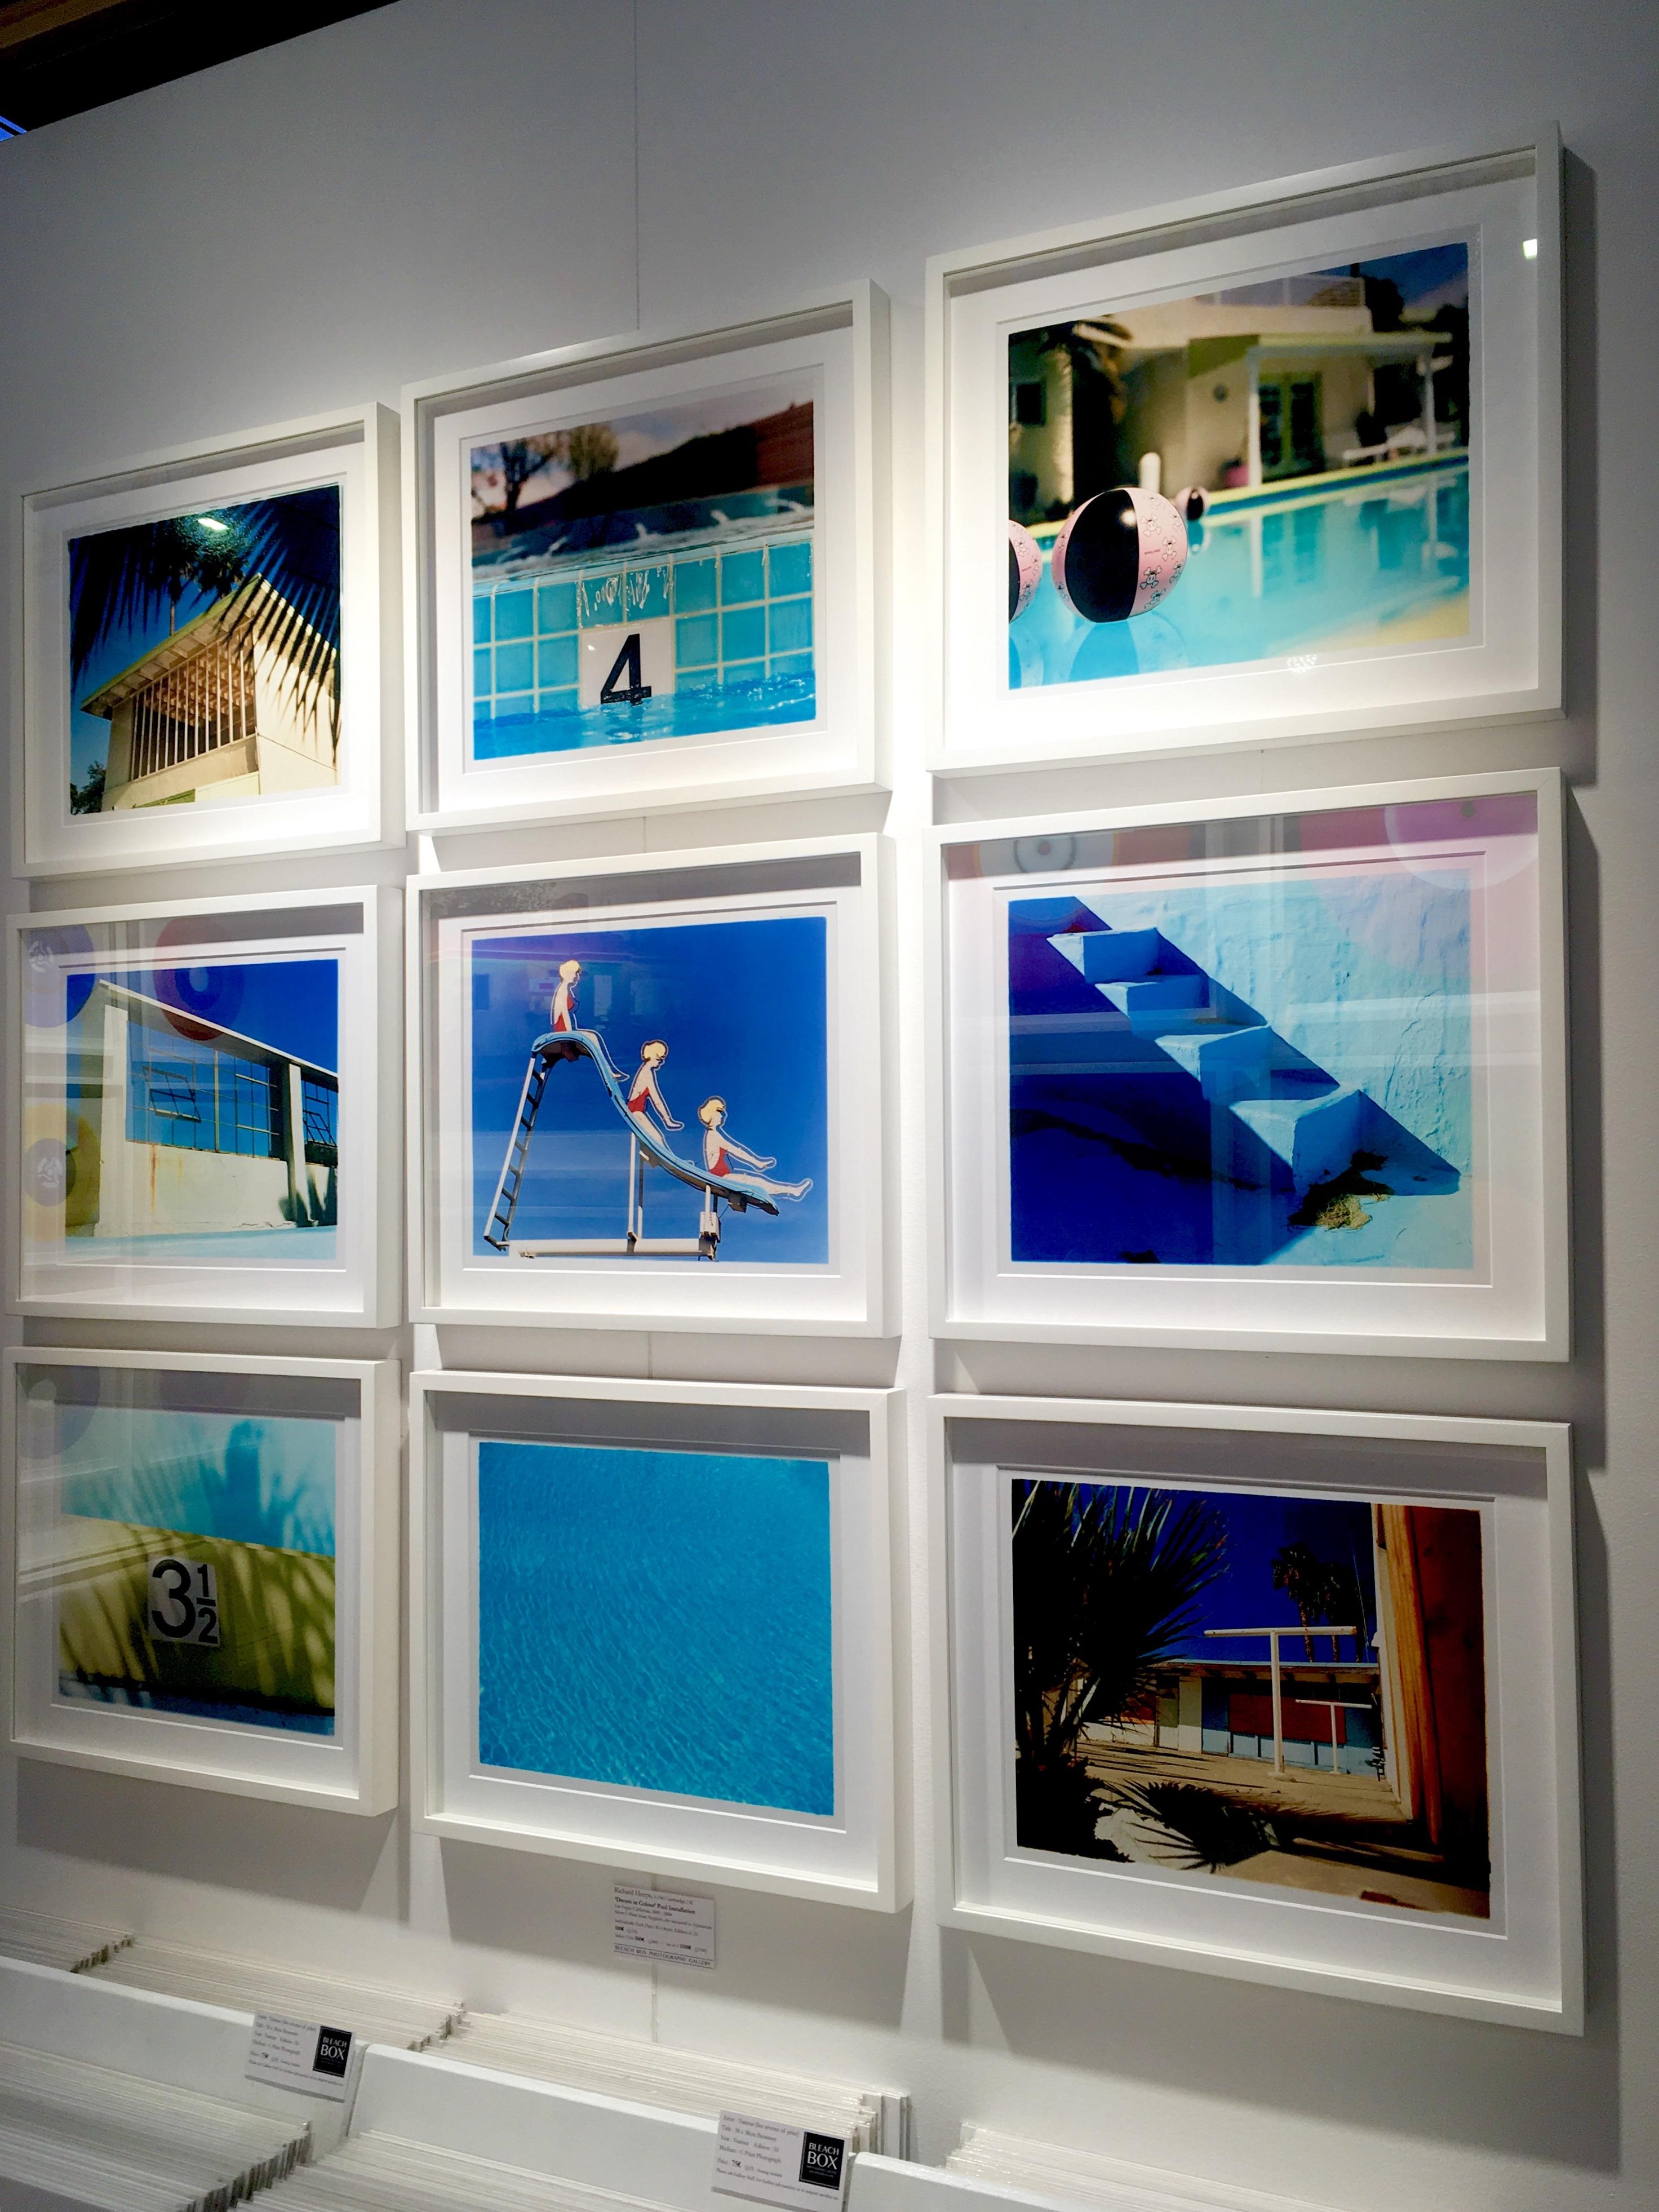 Part of Richard Heeps 'Dream in Colour' Series, with some seriously cool blue colors and dreamy pool vibes.

This artwork is a limited edition of 25, gloss photographic print, dry-mounted to aluminium, it is presented in a museum board white window